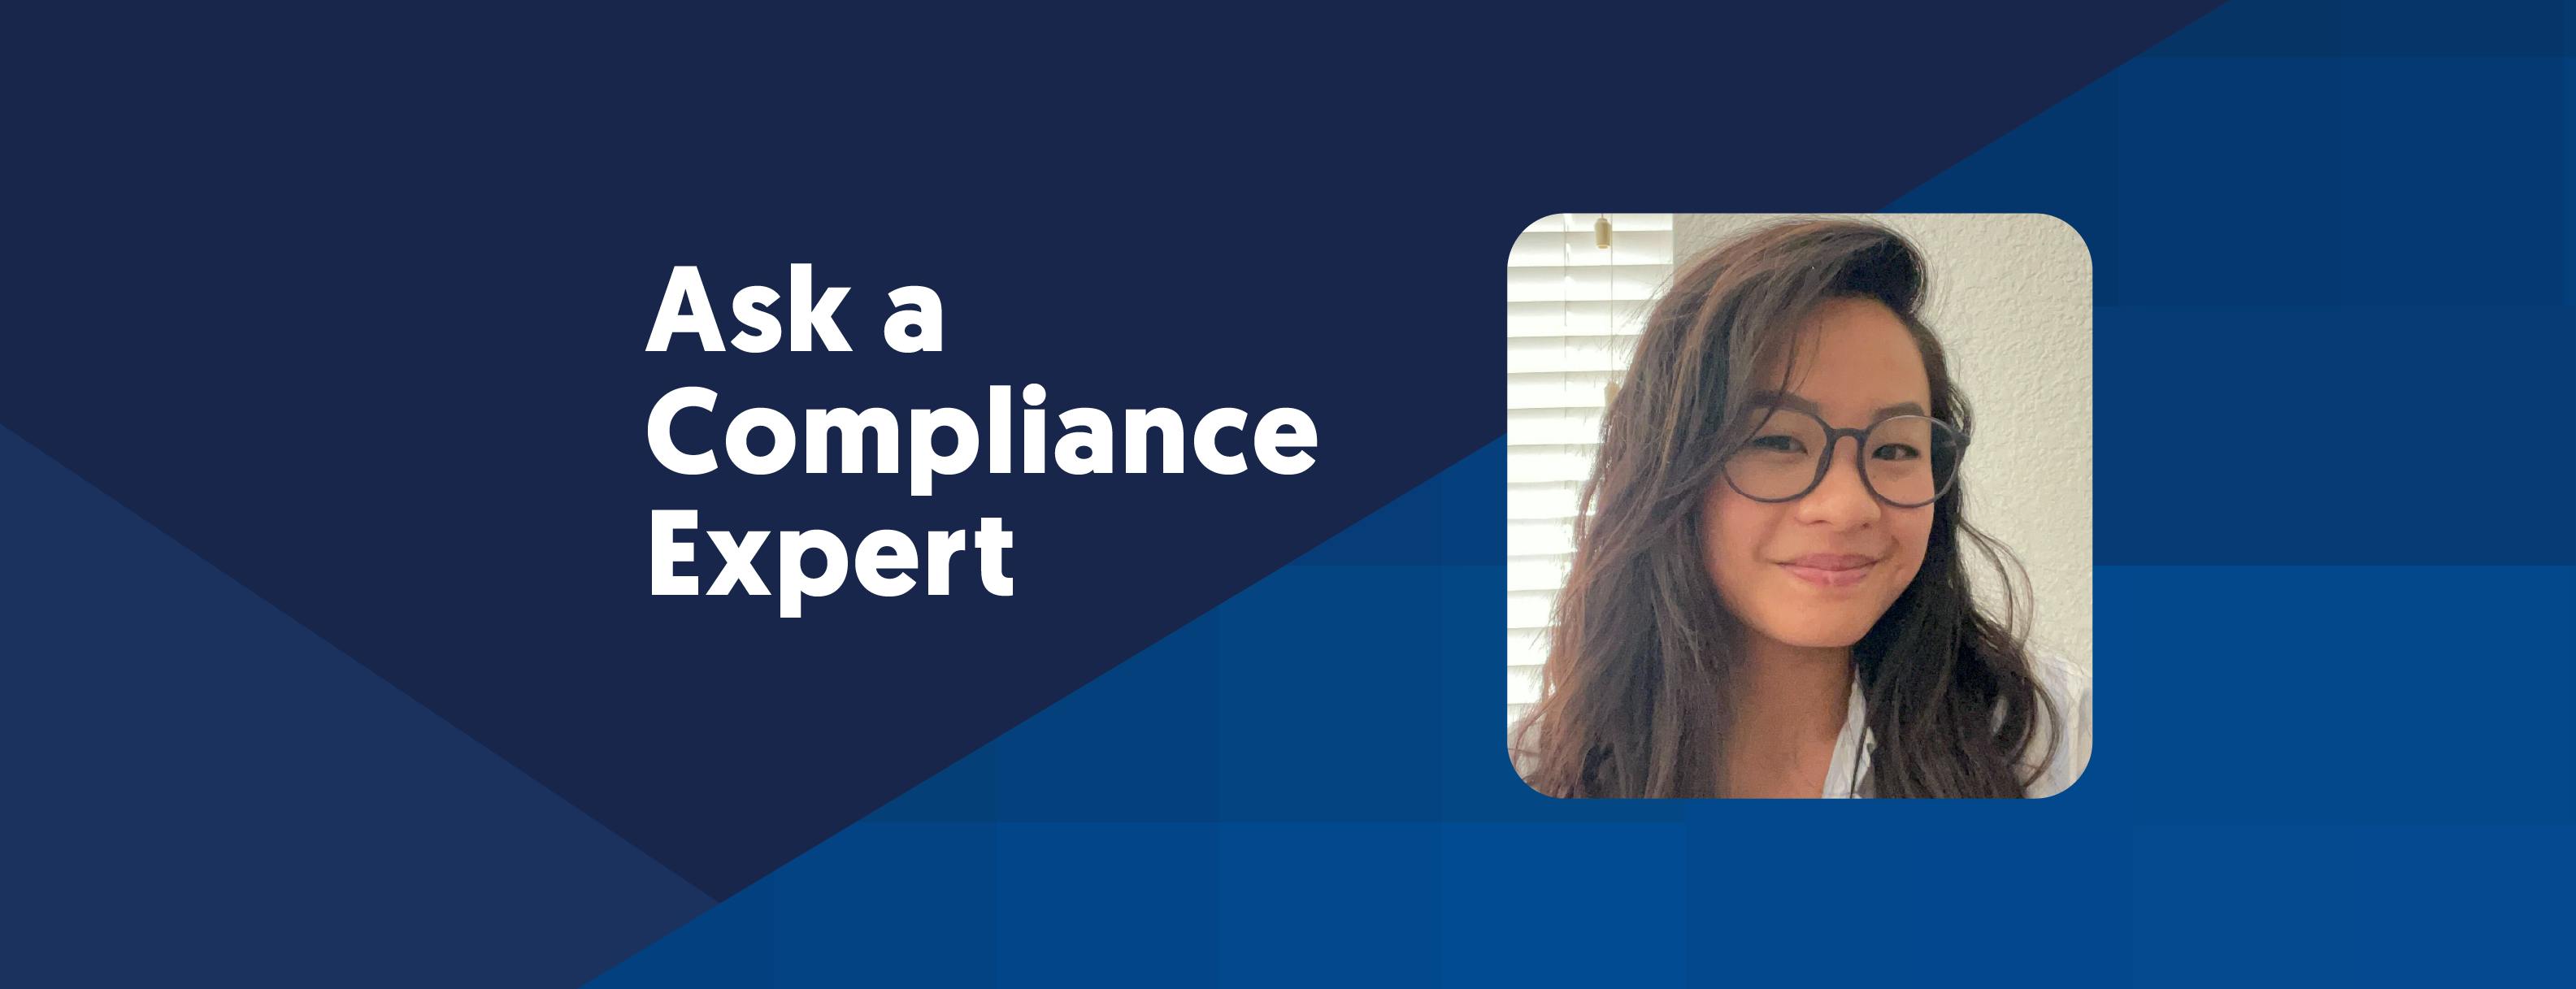 Ask the Compliance Expert: 10 Questions with Fortuna Gyeltsen, CISSP, CISA, PMP, CCSK, Security+